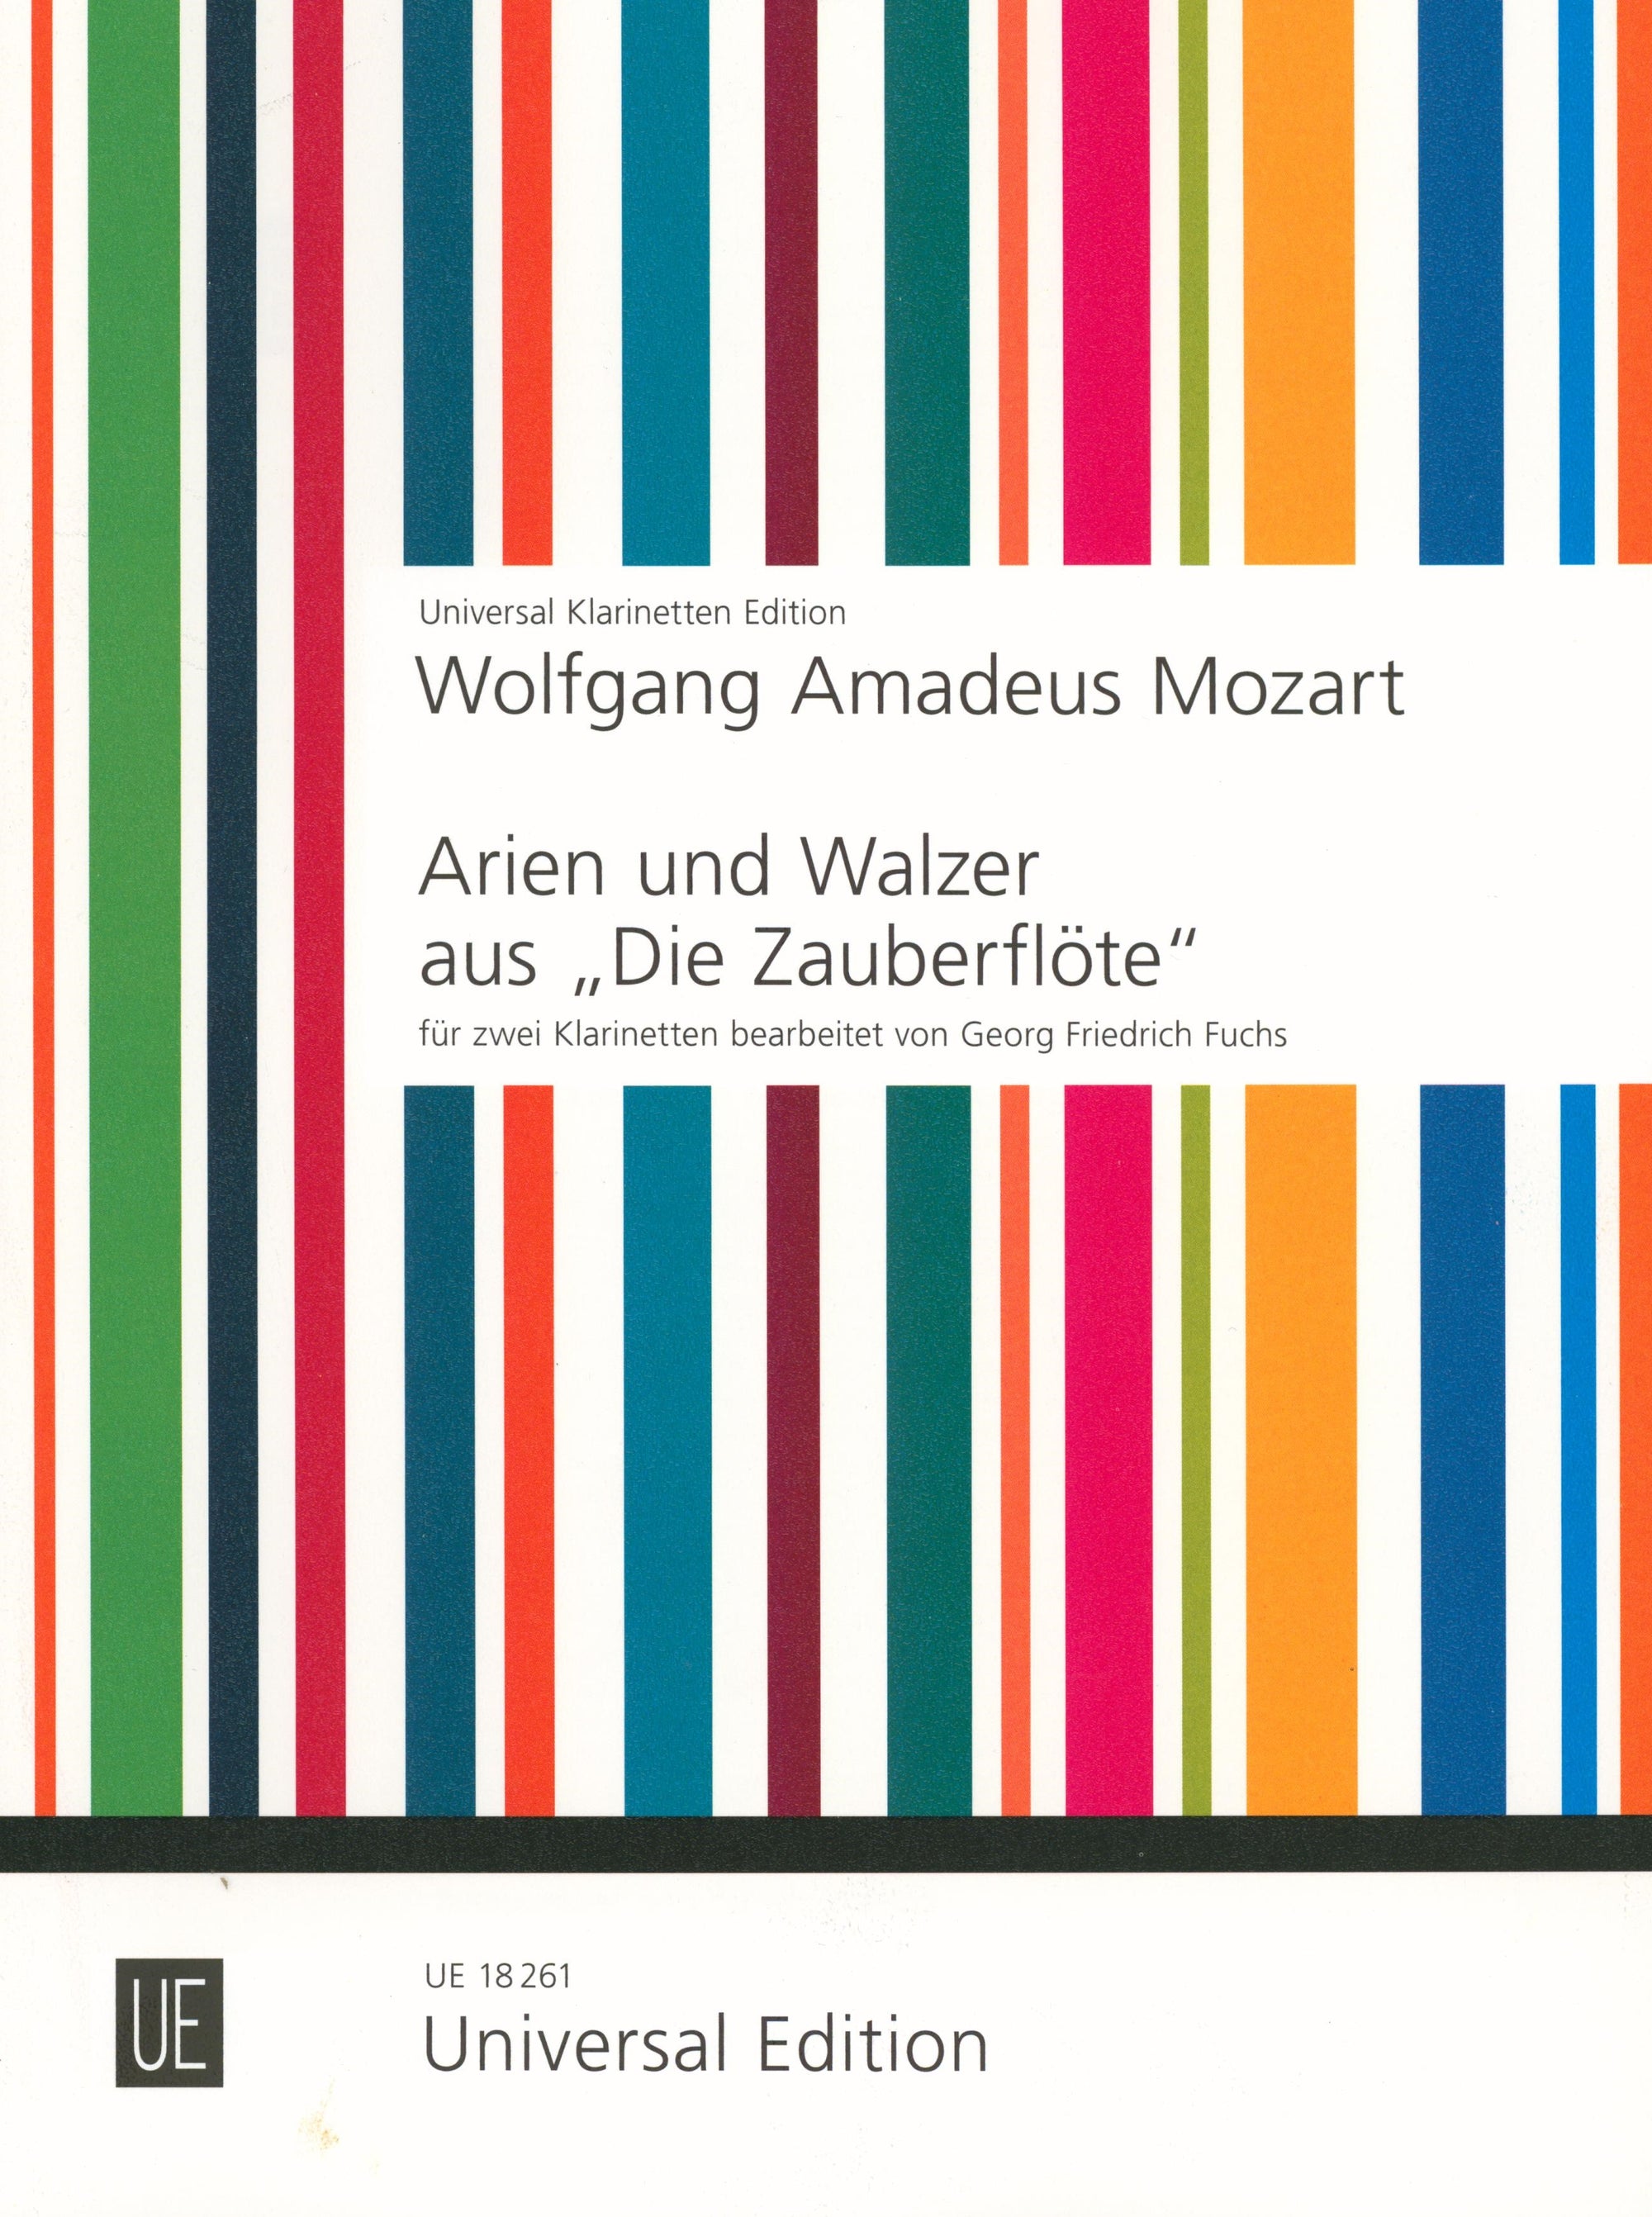 Mozart: Airs and Waltzes from the Magic Flute (arr. for 2 clarinets)